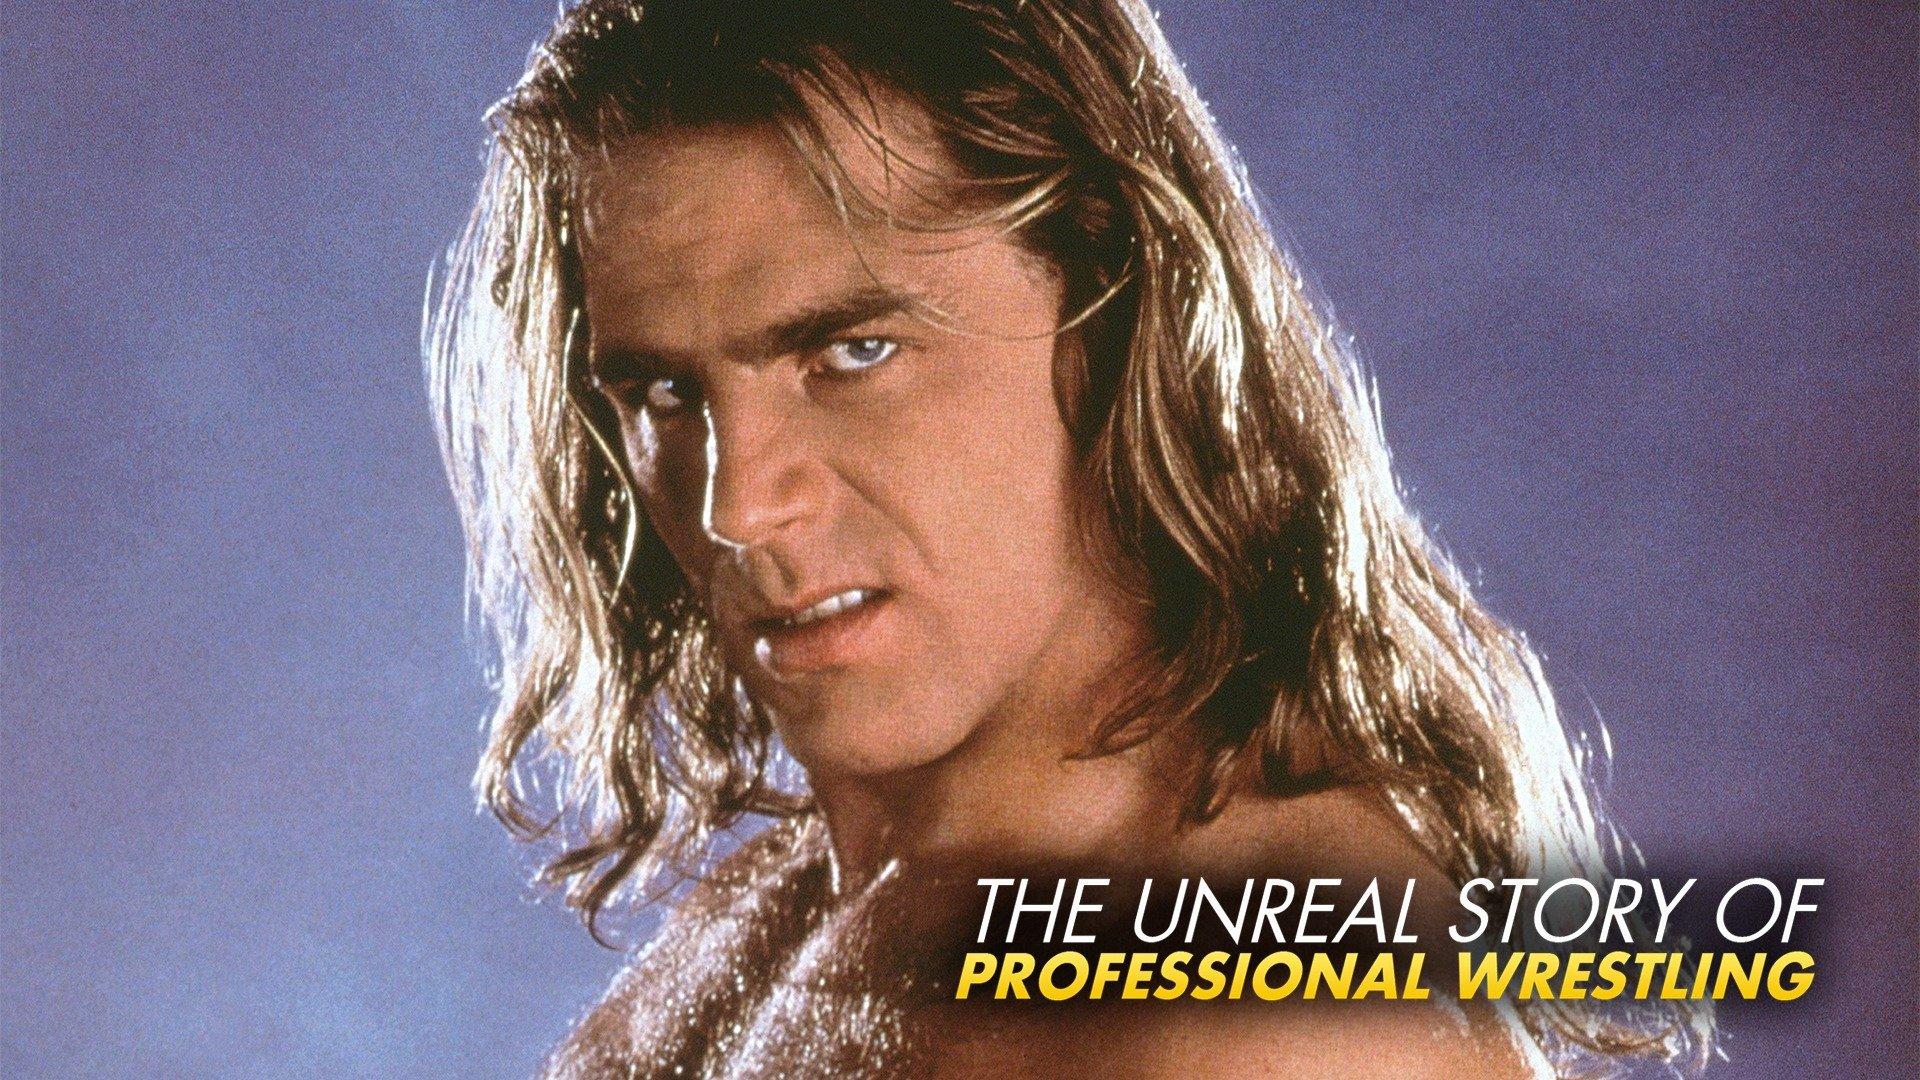 Watch The Unreal Story of Professional Wrestling Streaming Online on Philo ( Free Trial)